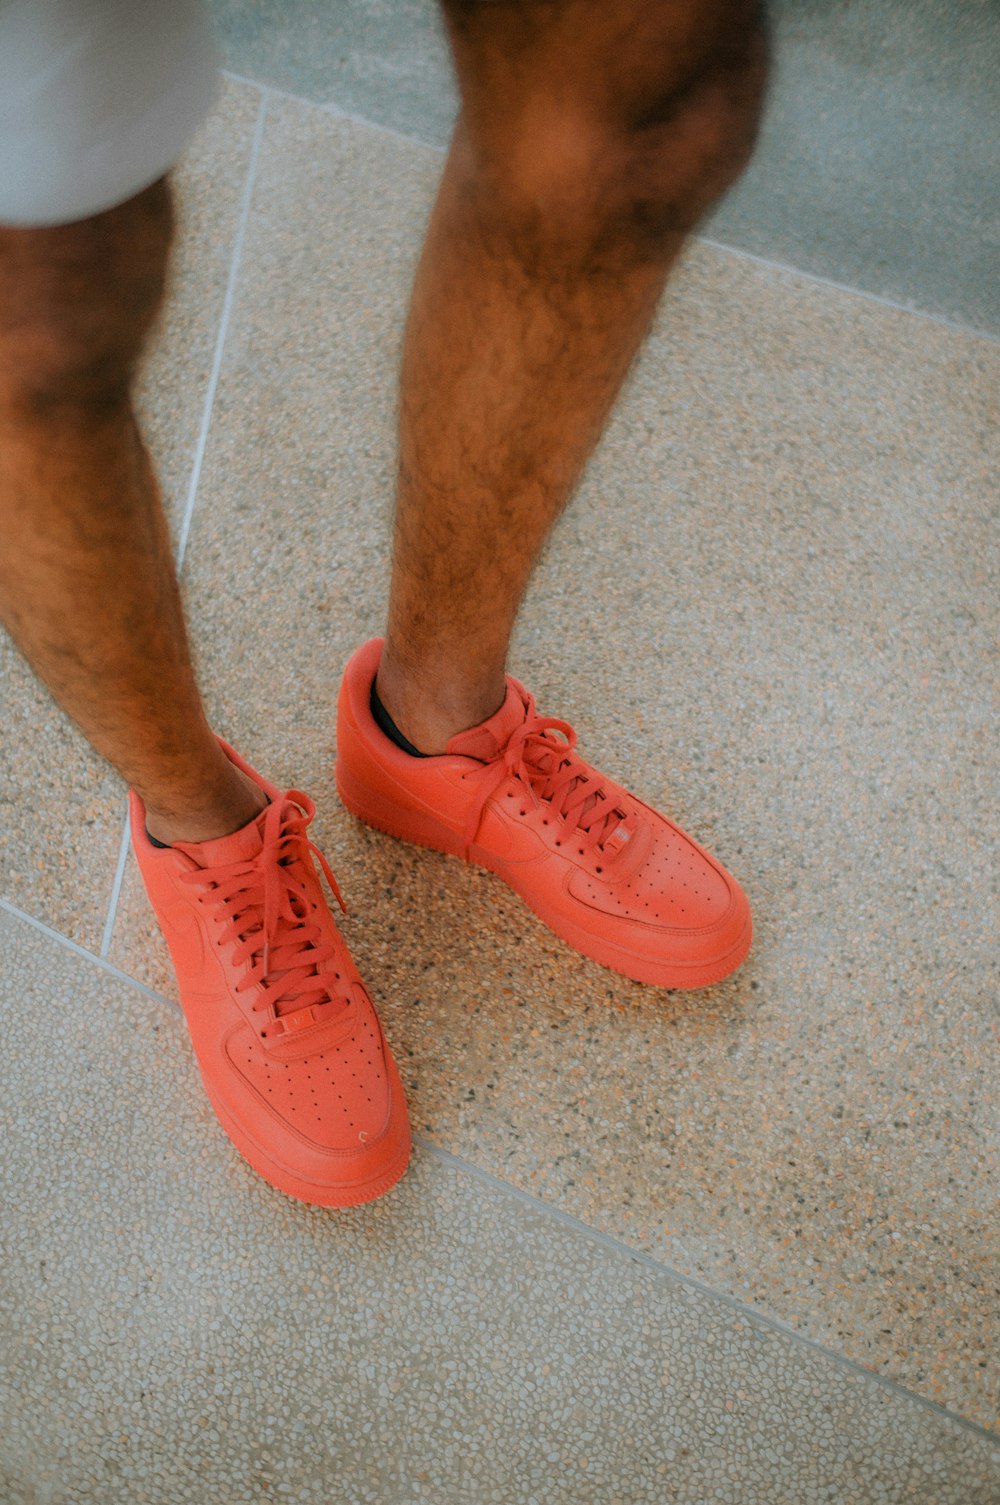 a person standing on a tile floor wearing orange sneakers